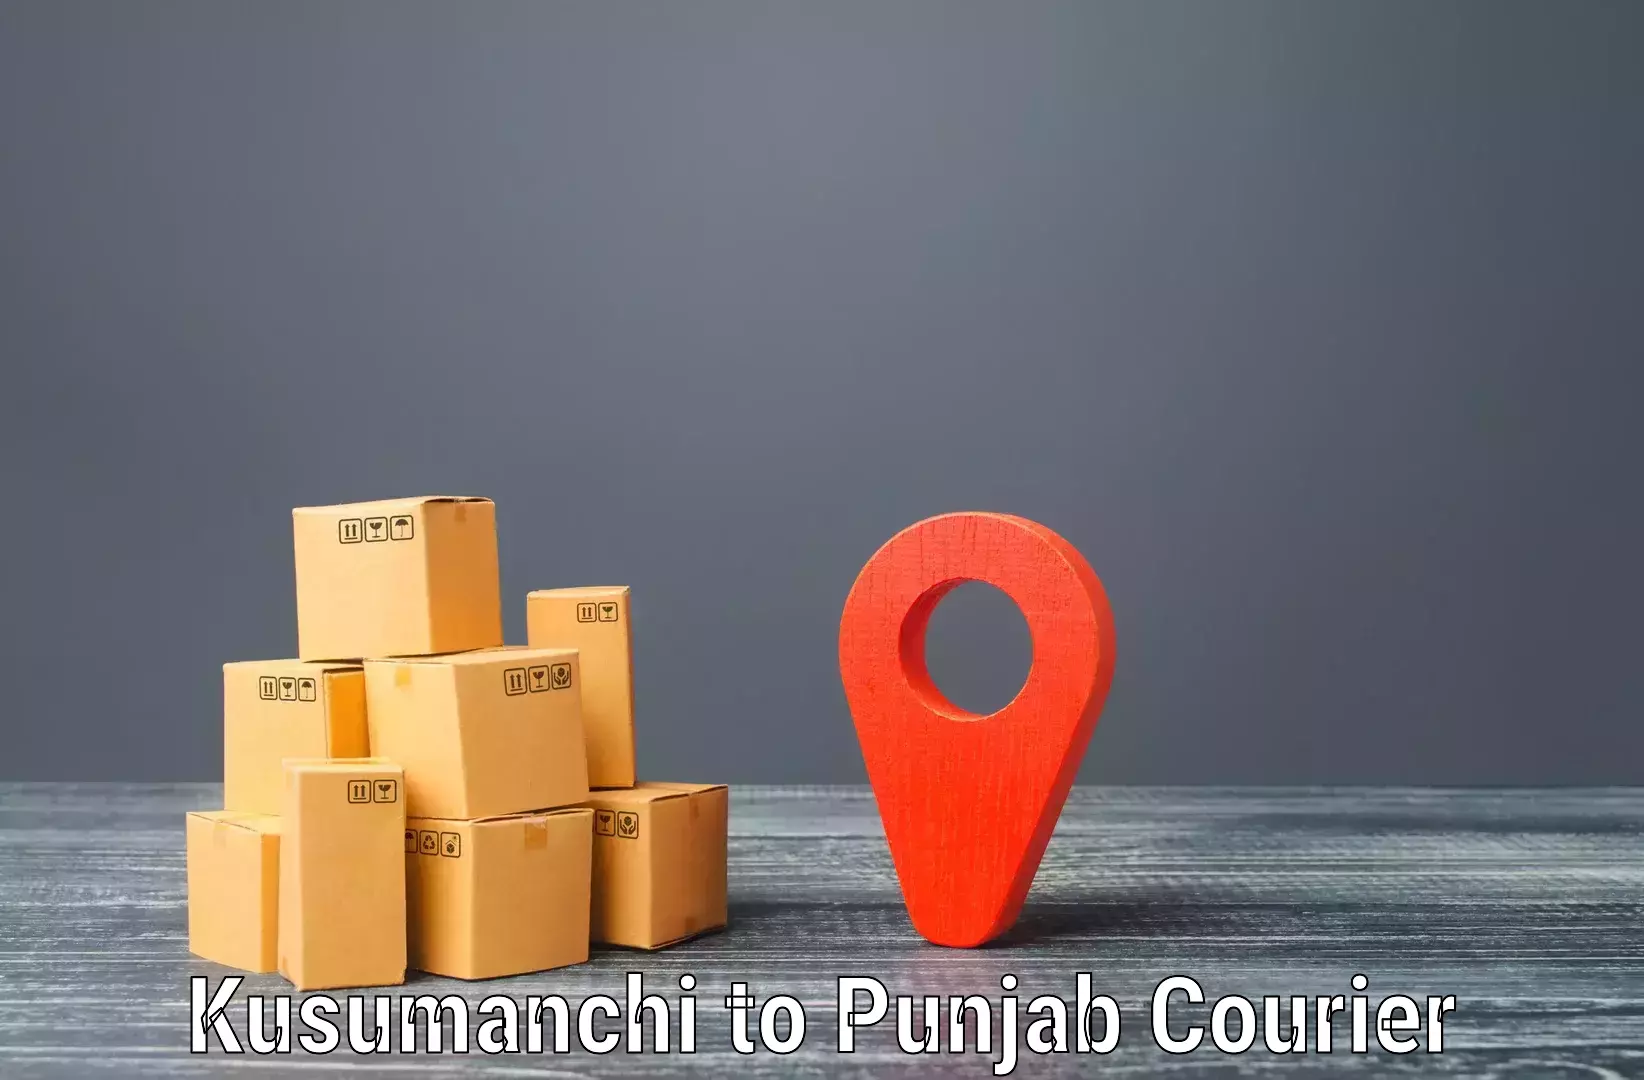 Automated parcel services Kusumanchi to Patiala